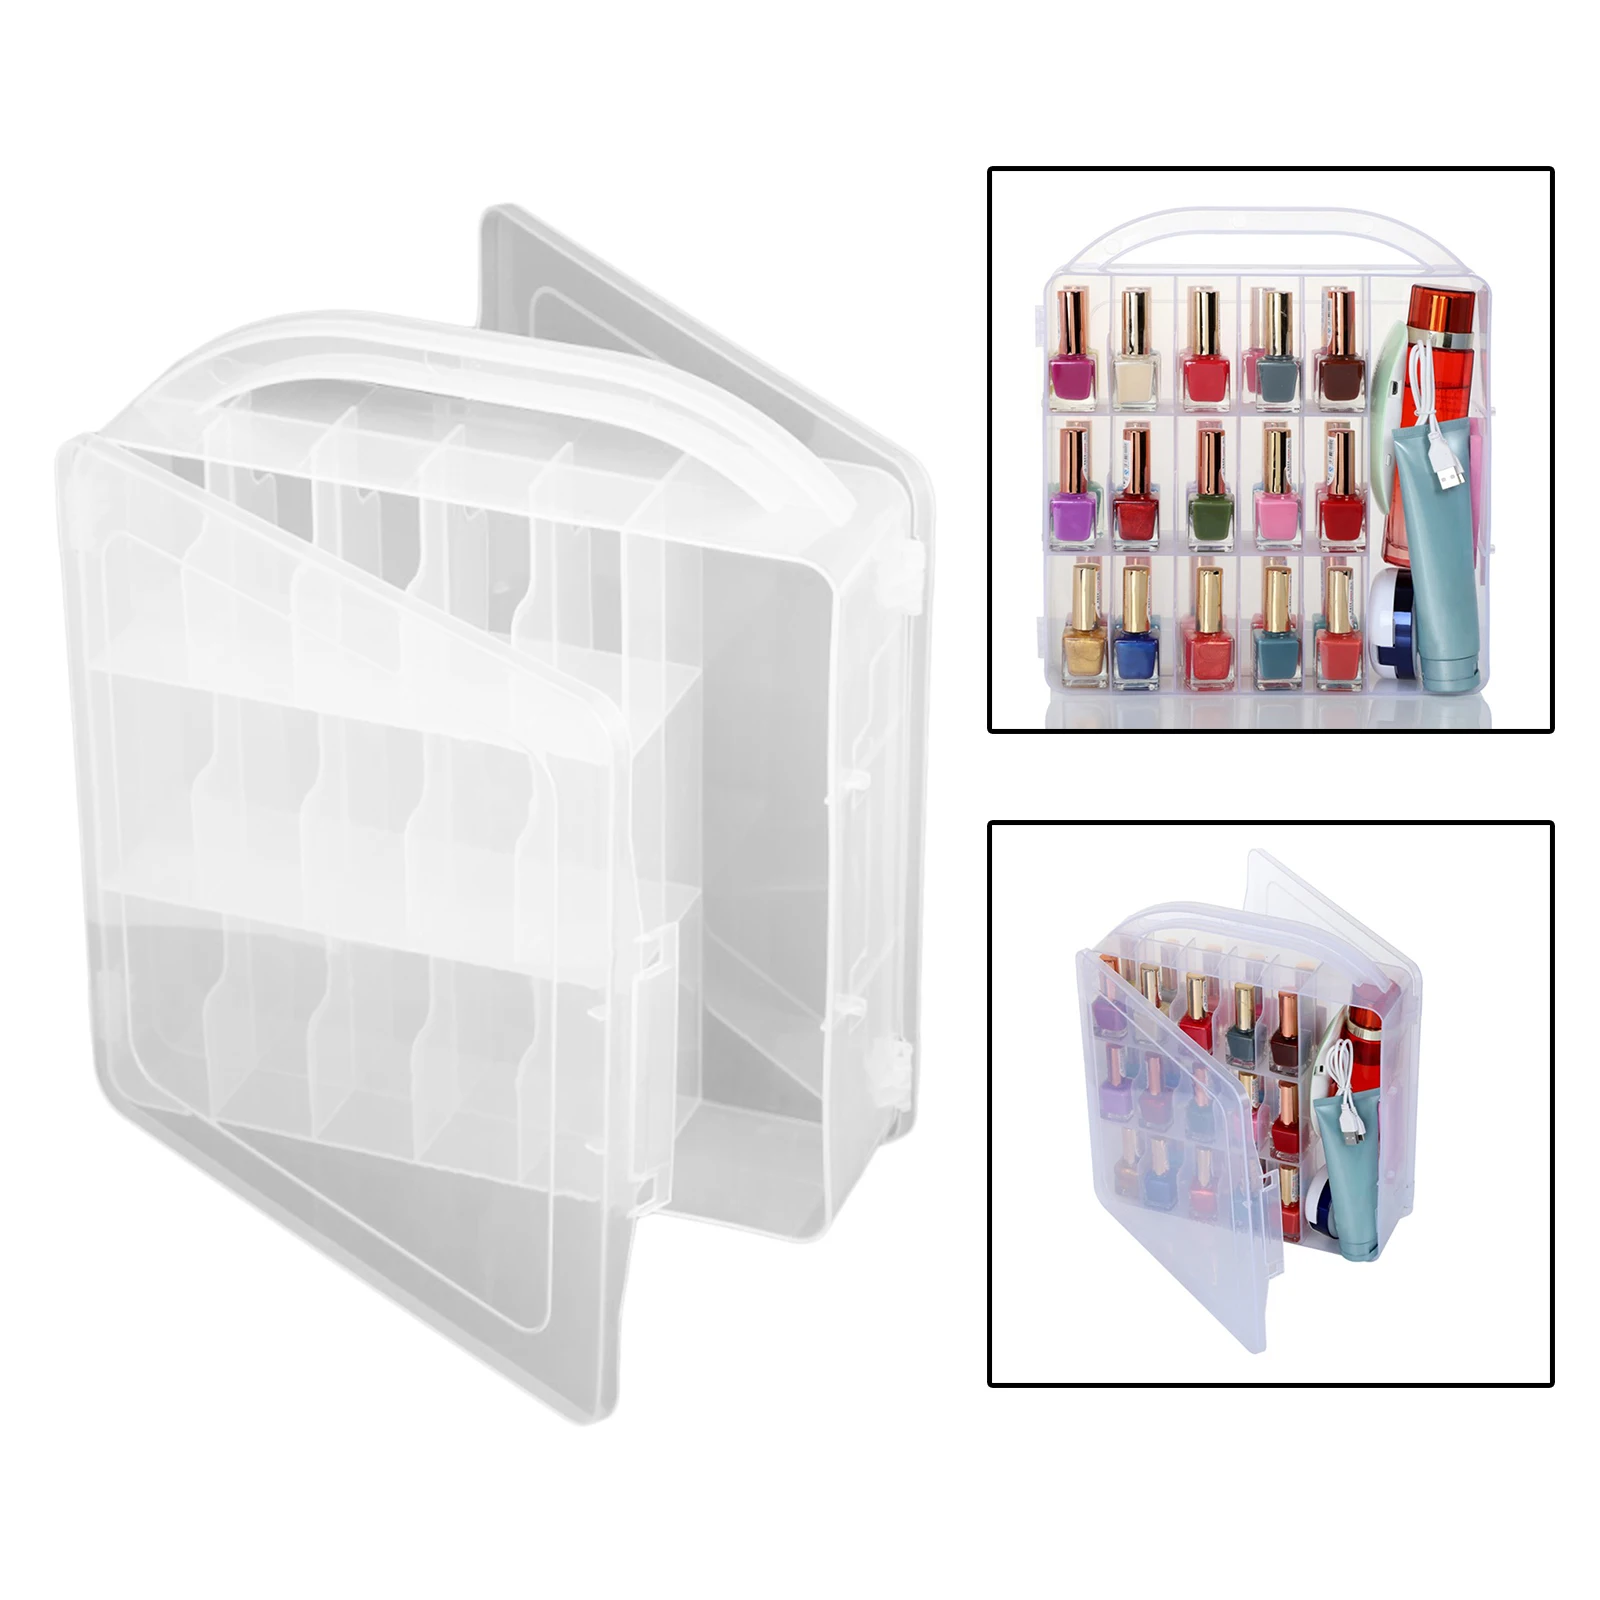 Portable Nail Polish Case Storage Caddy Organisers for 30 Bottles Dust-proof